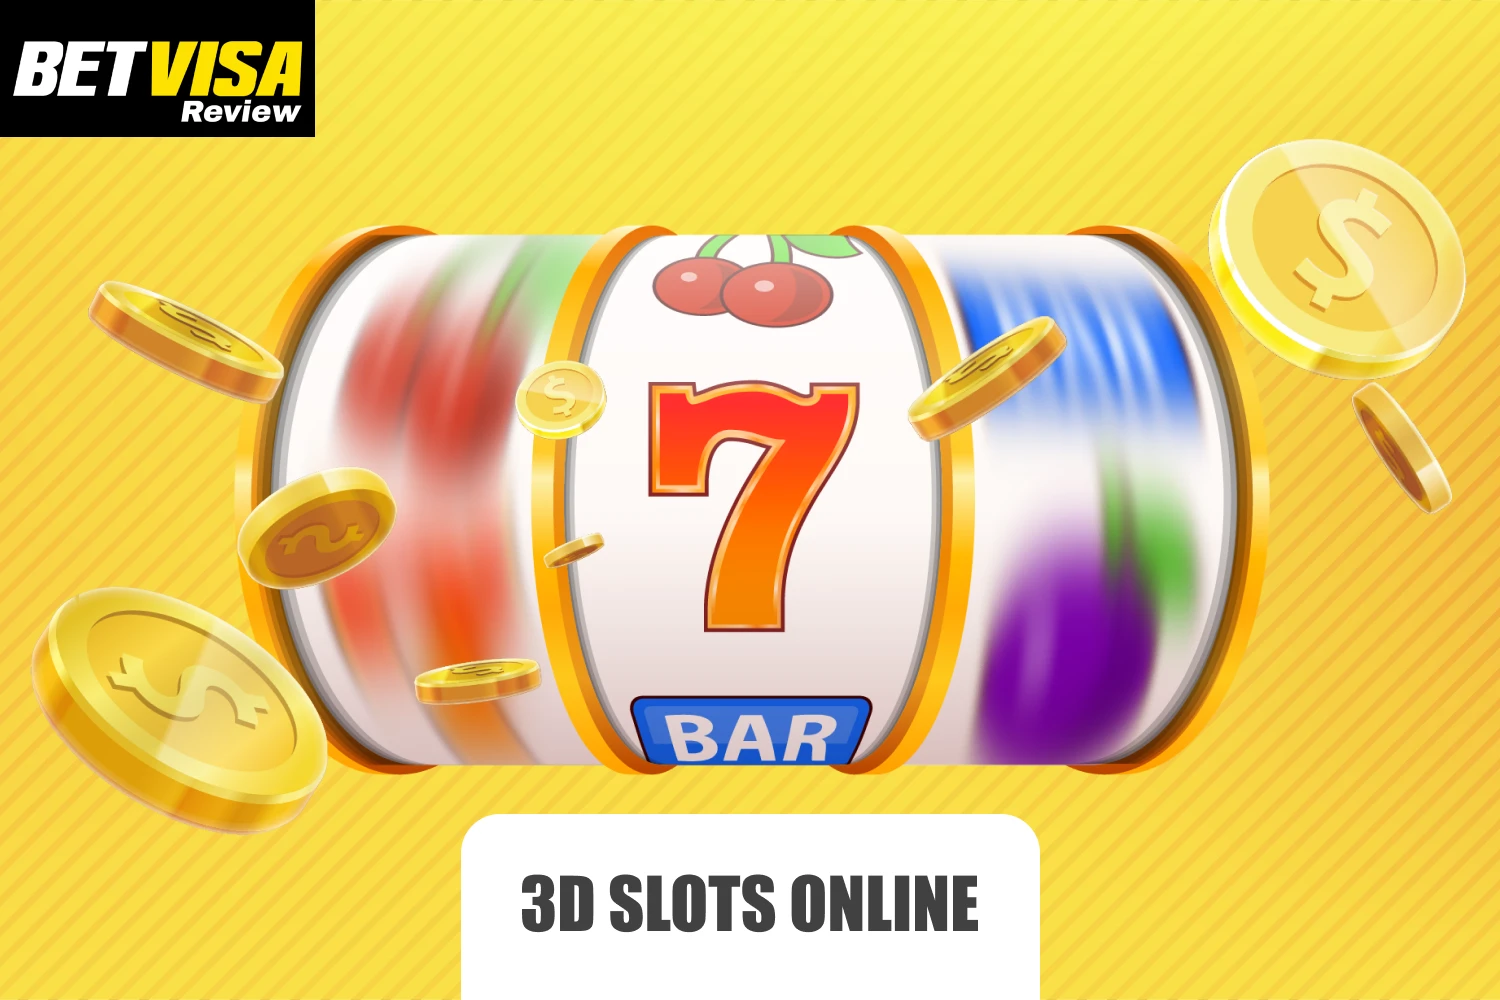 3D slots at Betvisa give Indian players an unforgettable experience by combining gameplay with cinematic visuals